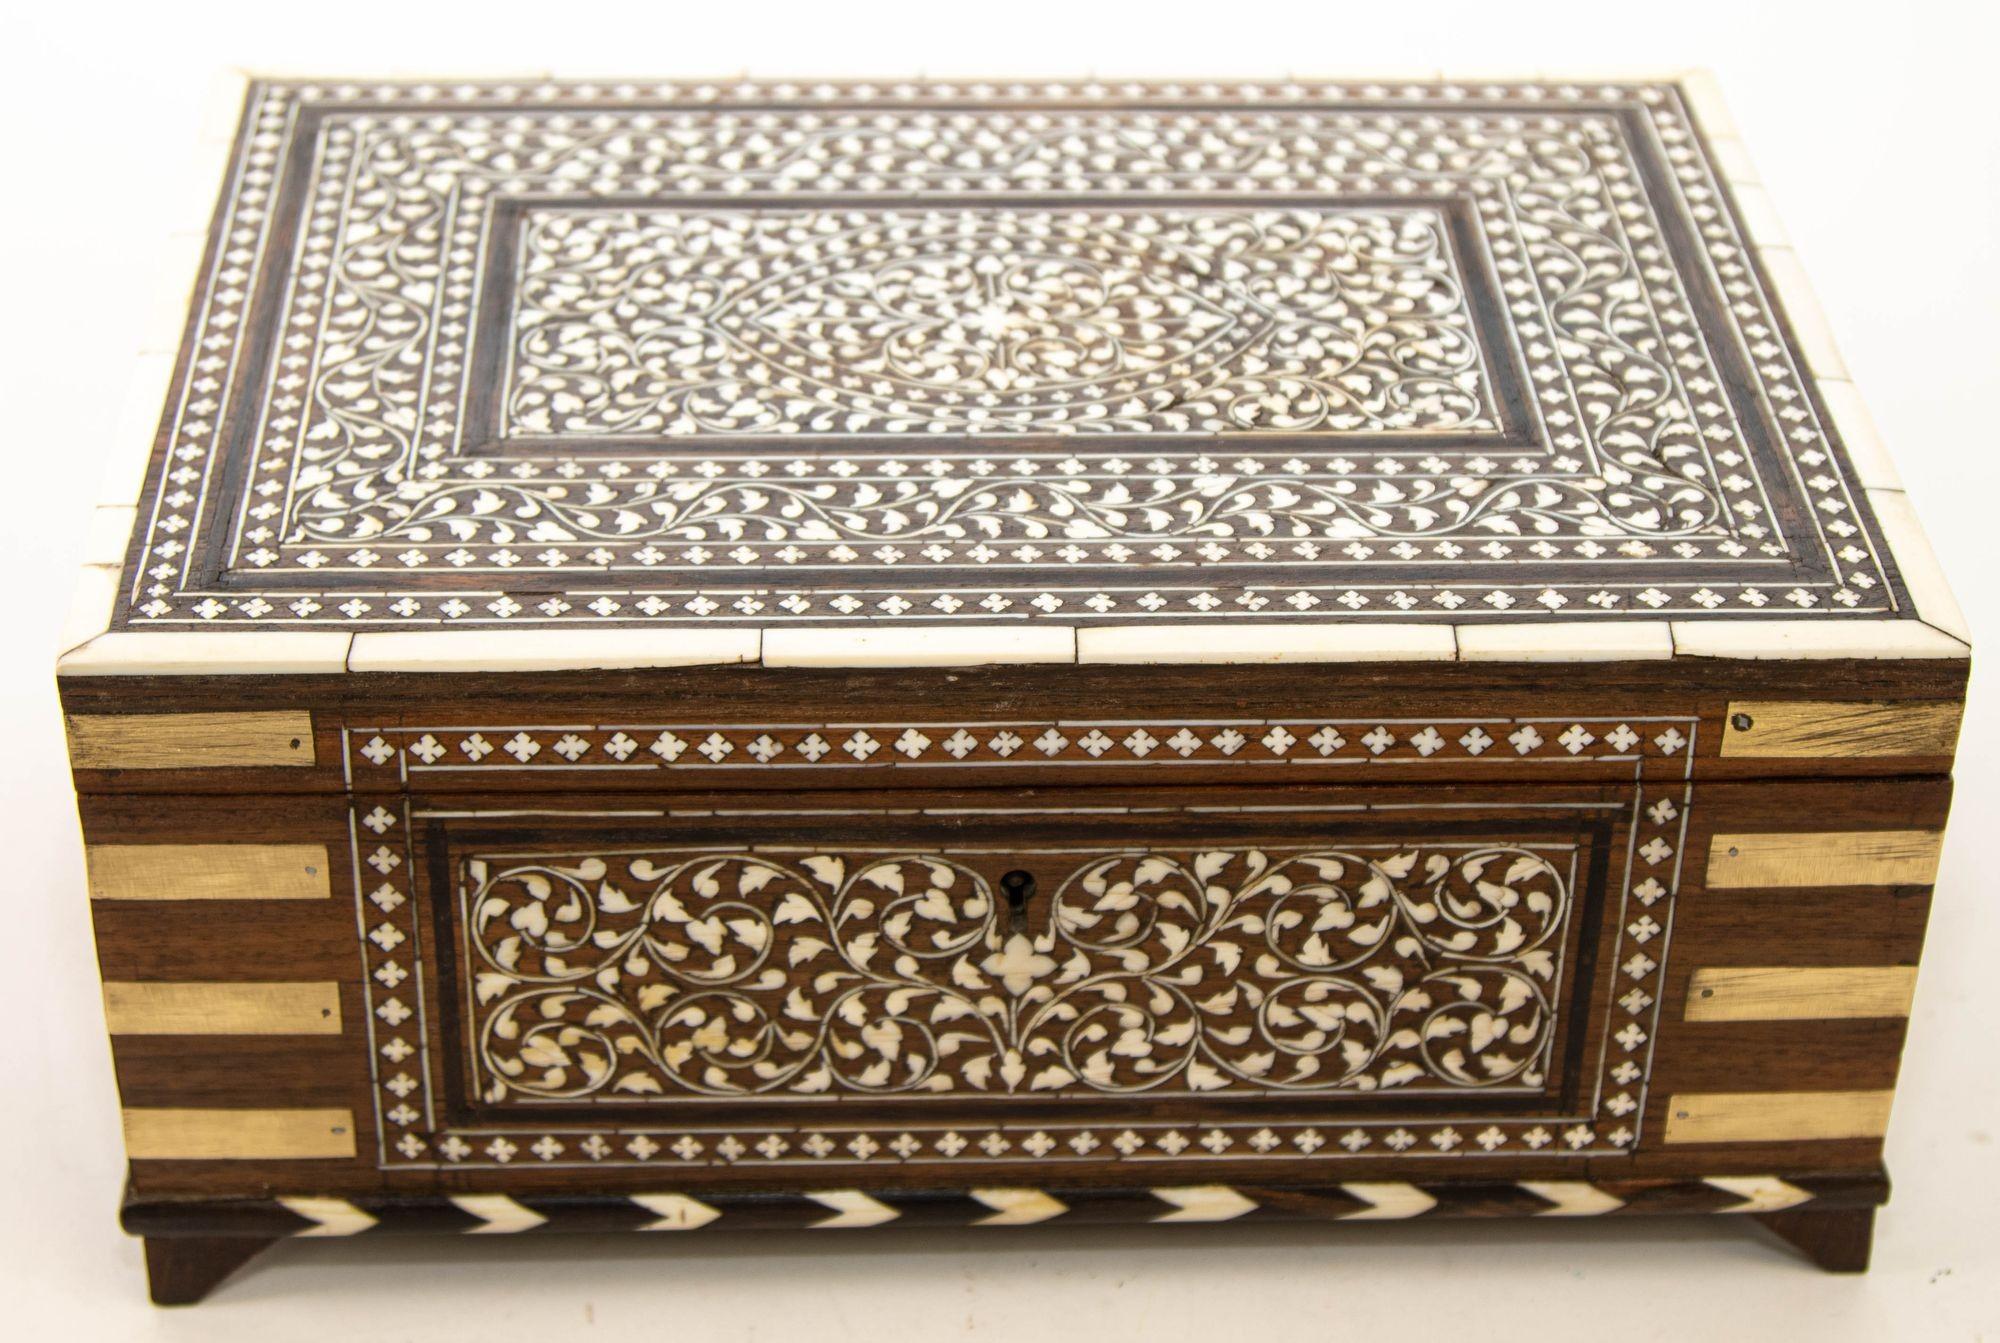 Presenting an absolutely stunning Outstanding Victorian extremely rare 19th century Anglo-Indian Stationery Campaign chest writing box.
Gorgeous and extremely rare and unique 19th century Anglo Indian hardwood box, made in 1897.
19th Century large